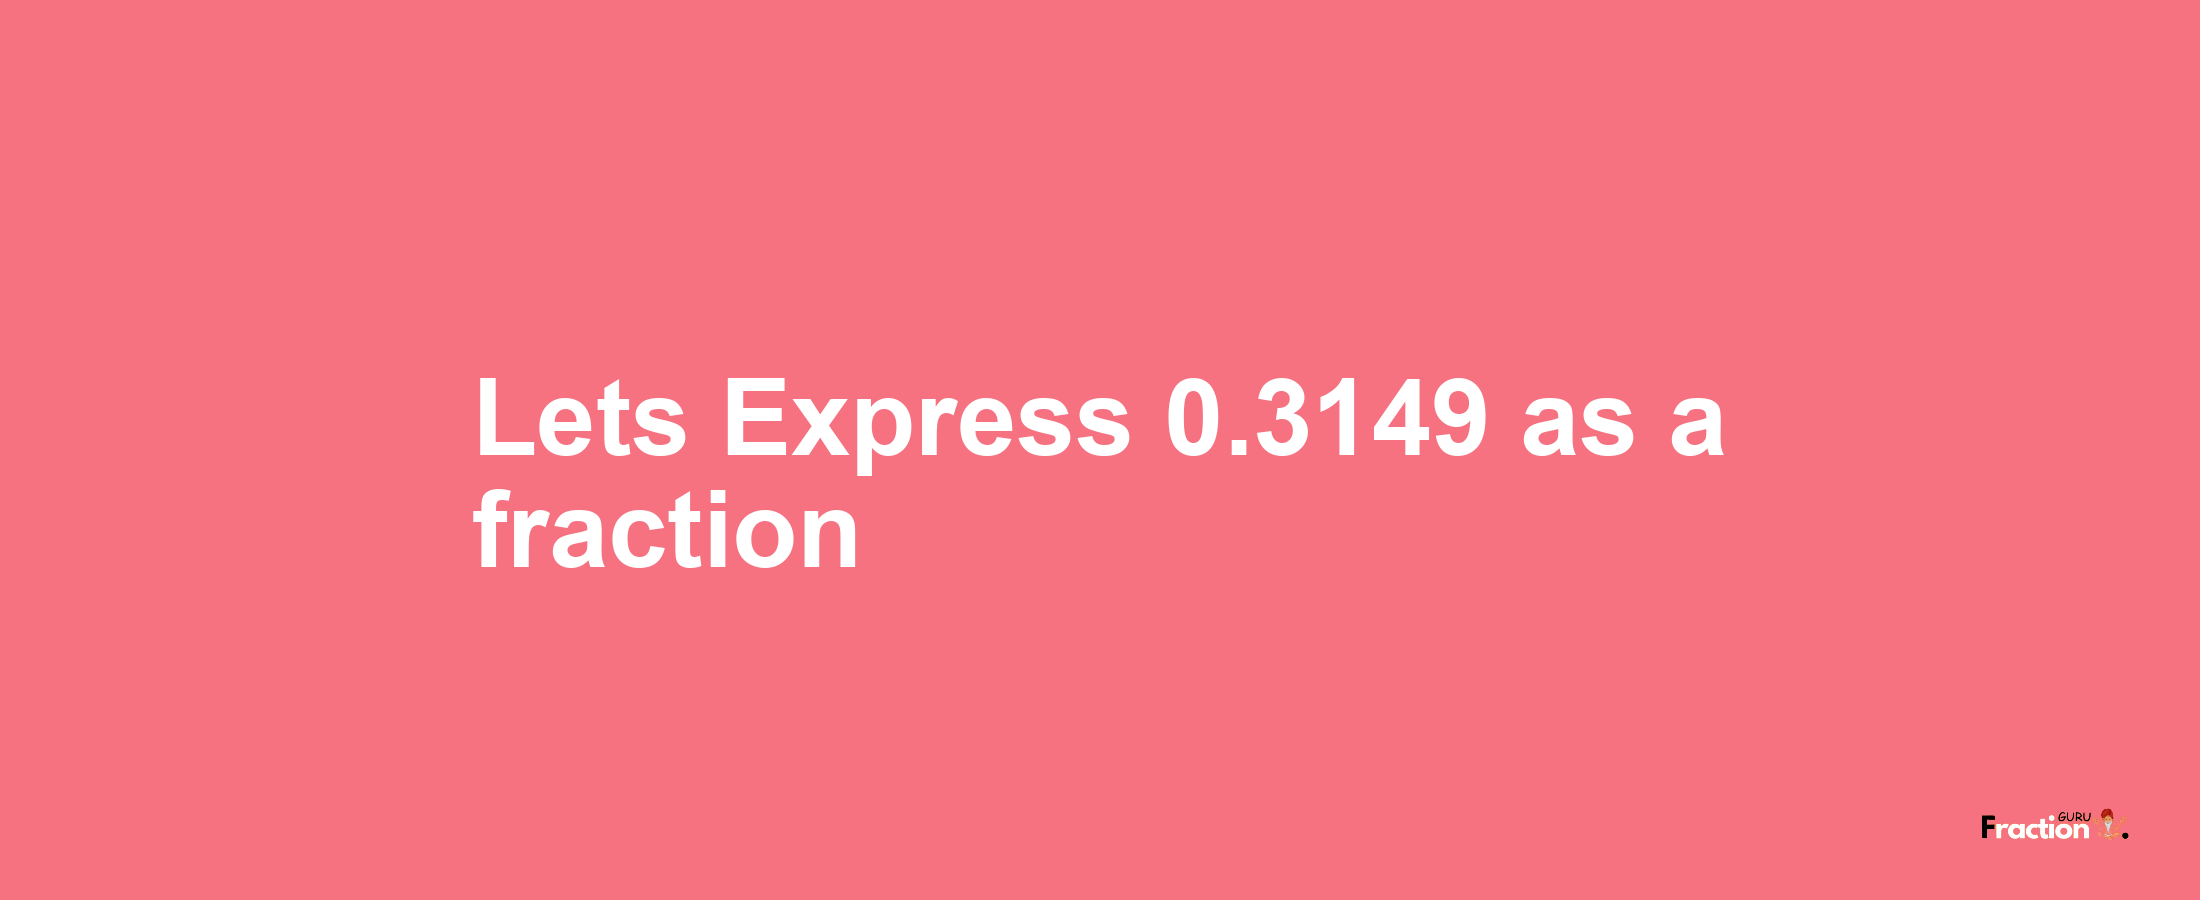 Lets Express 0.3149 as afraction